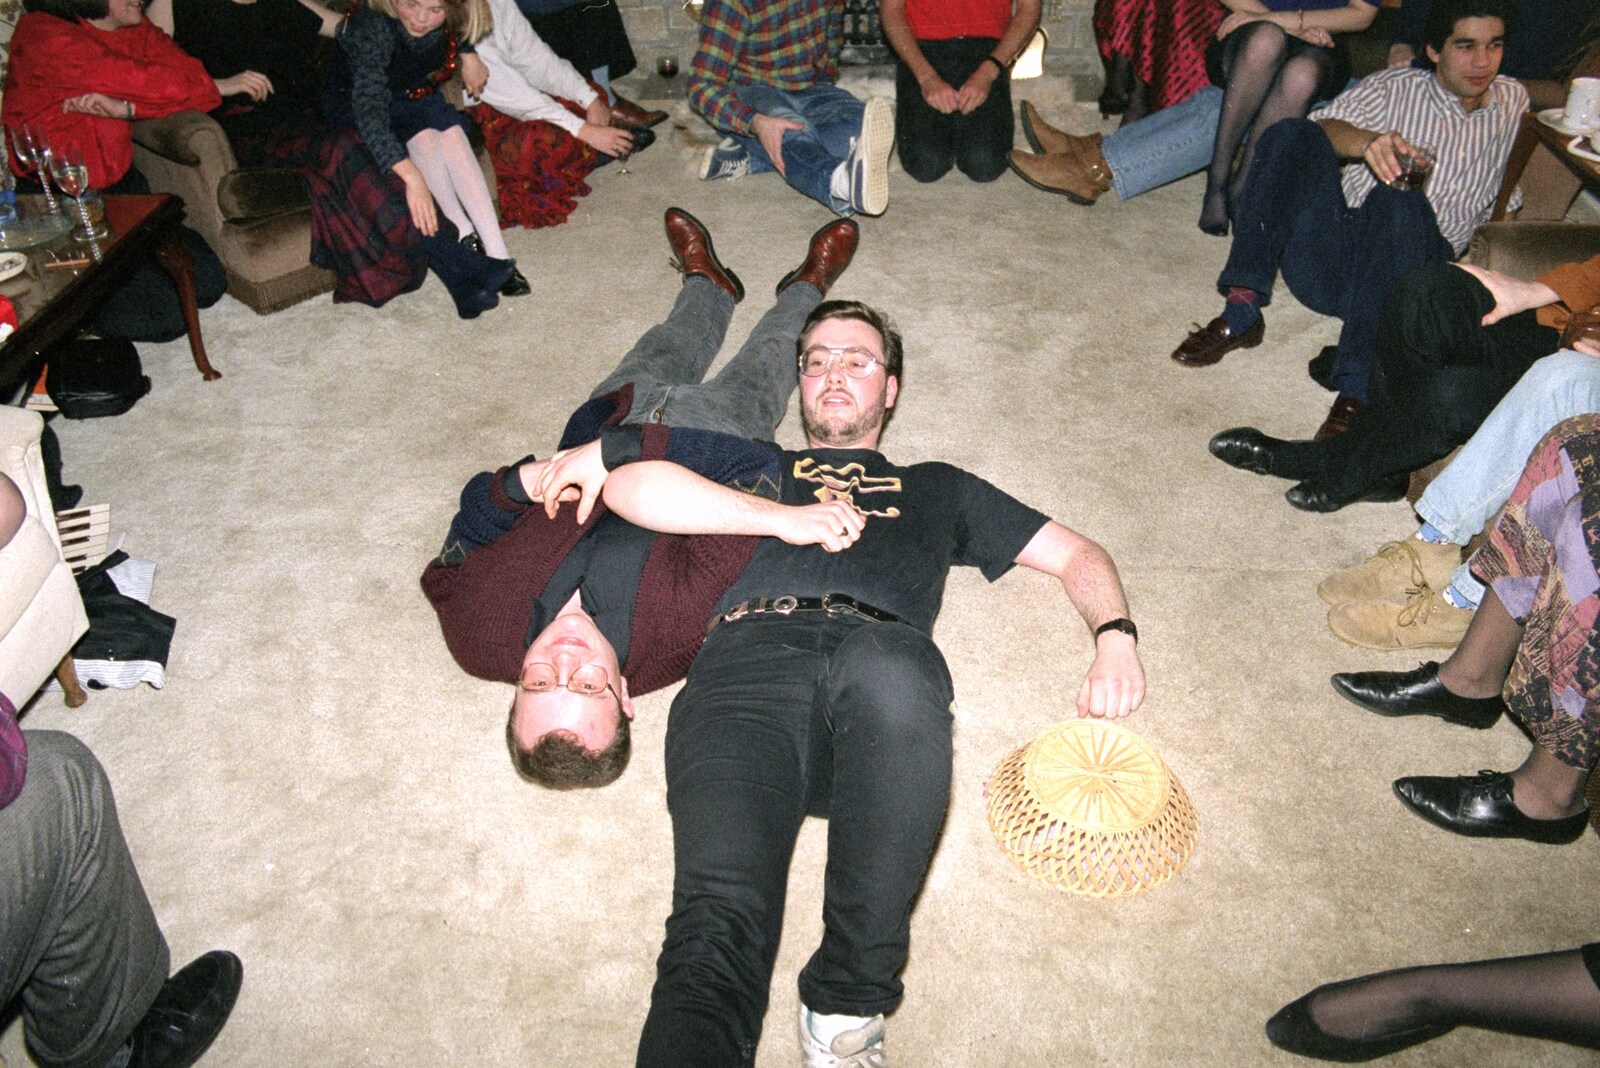 It's Hamish's turn on the floor from New Year's Eve at Phil's, Hordle, Hampshire - 31st December 1990